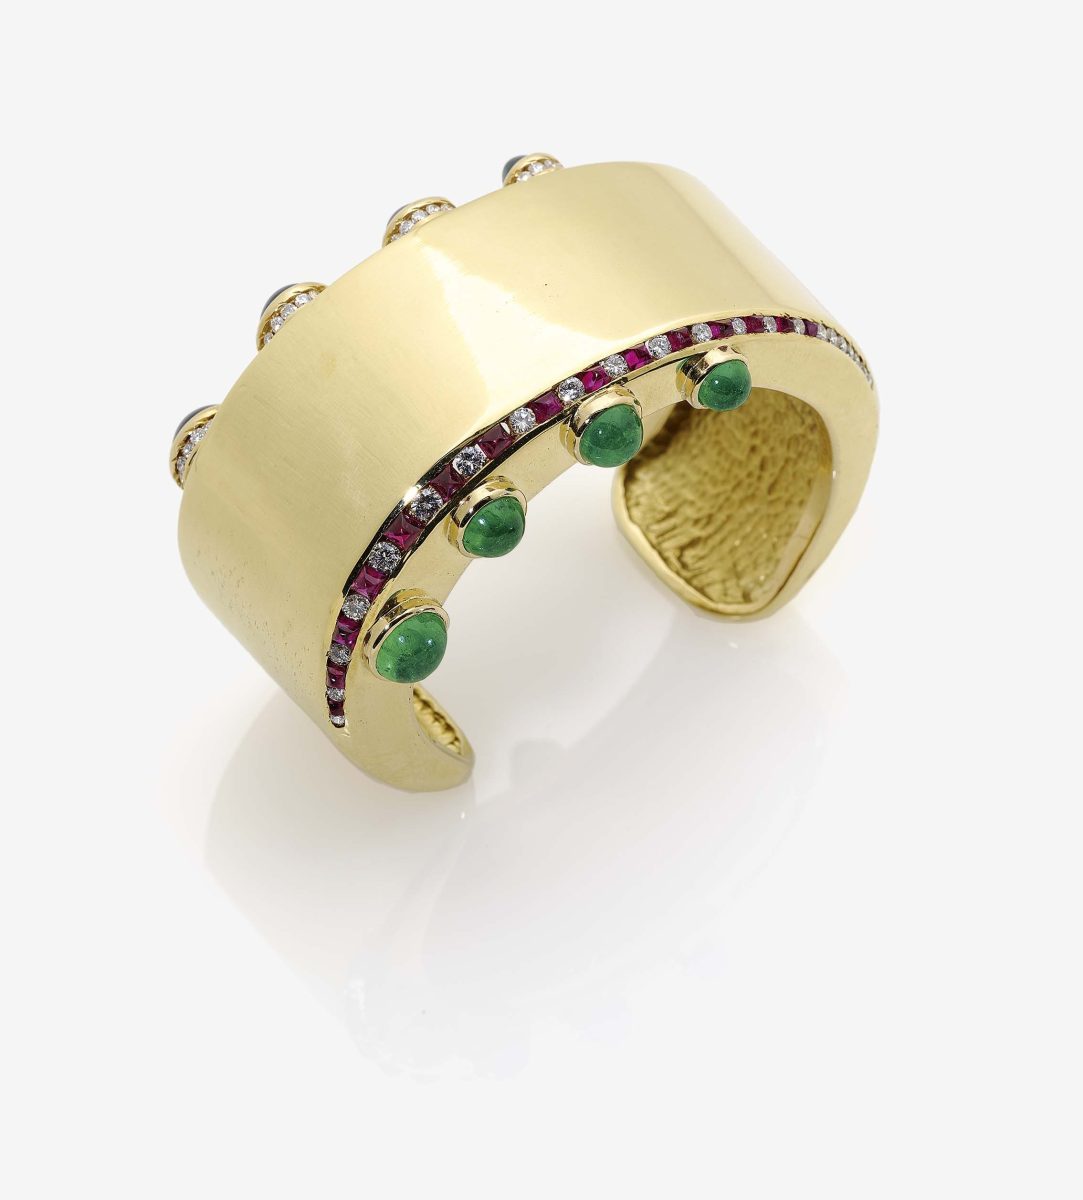 An Emerald, Sapphire, Ruby and Diamond Bangle18K yellow gold, stamped. Hallmarks. 49 brilliant-cut